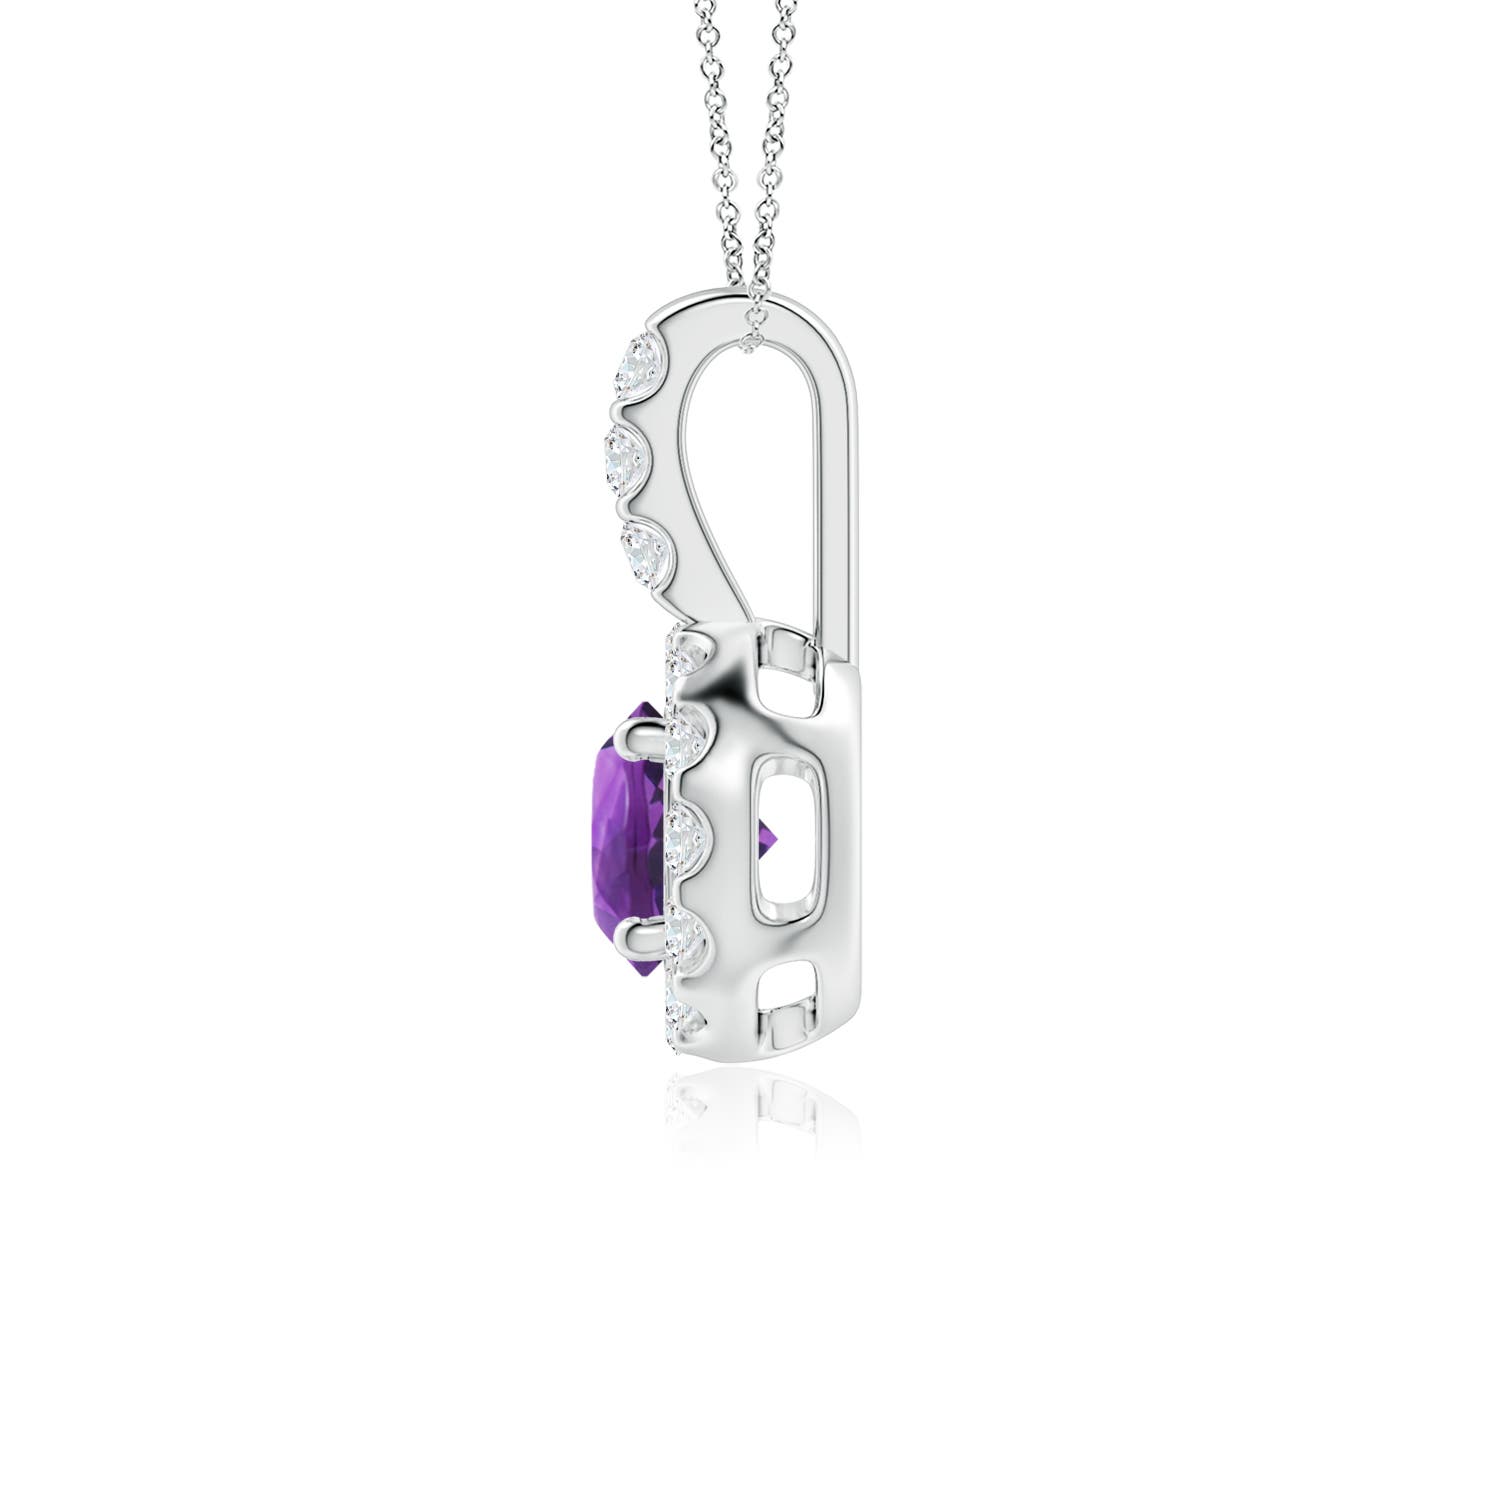 AAA - Amethyst / 0.63 CT / 14 KT White Gold